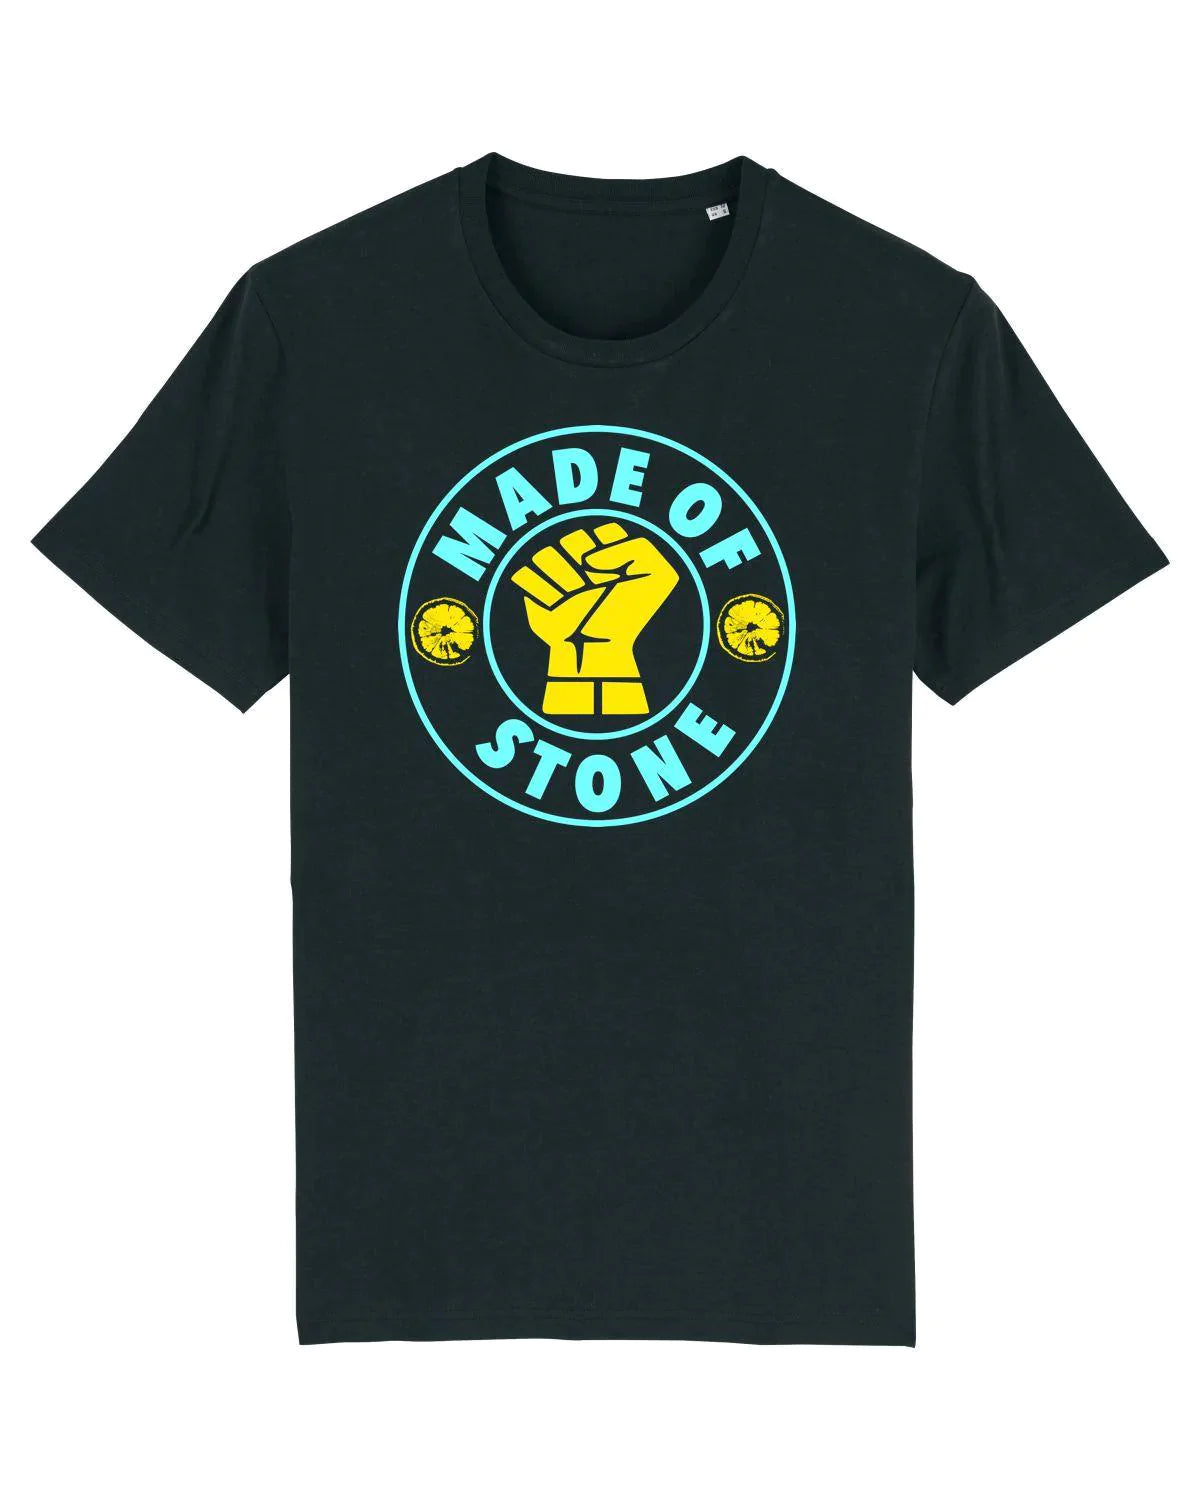 MADE OF STONE (Sky / Yellow): T-Shirt Inspired by The Stone Roses & Keep The Faith - SOUND IS COLOUR